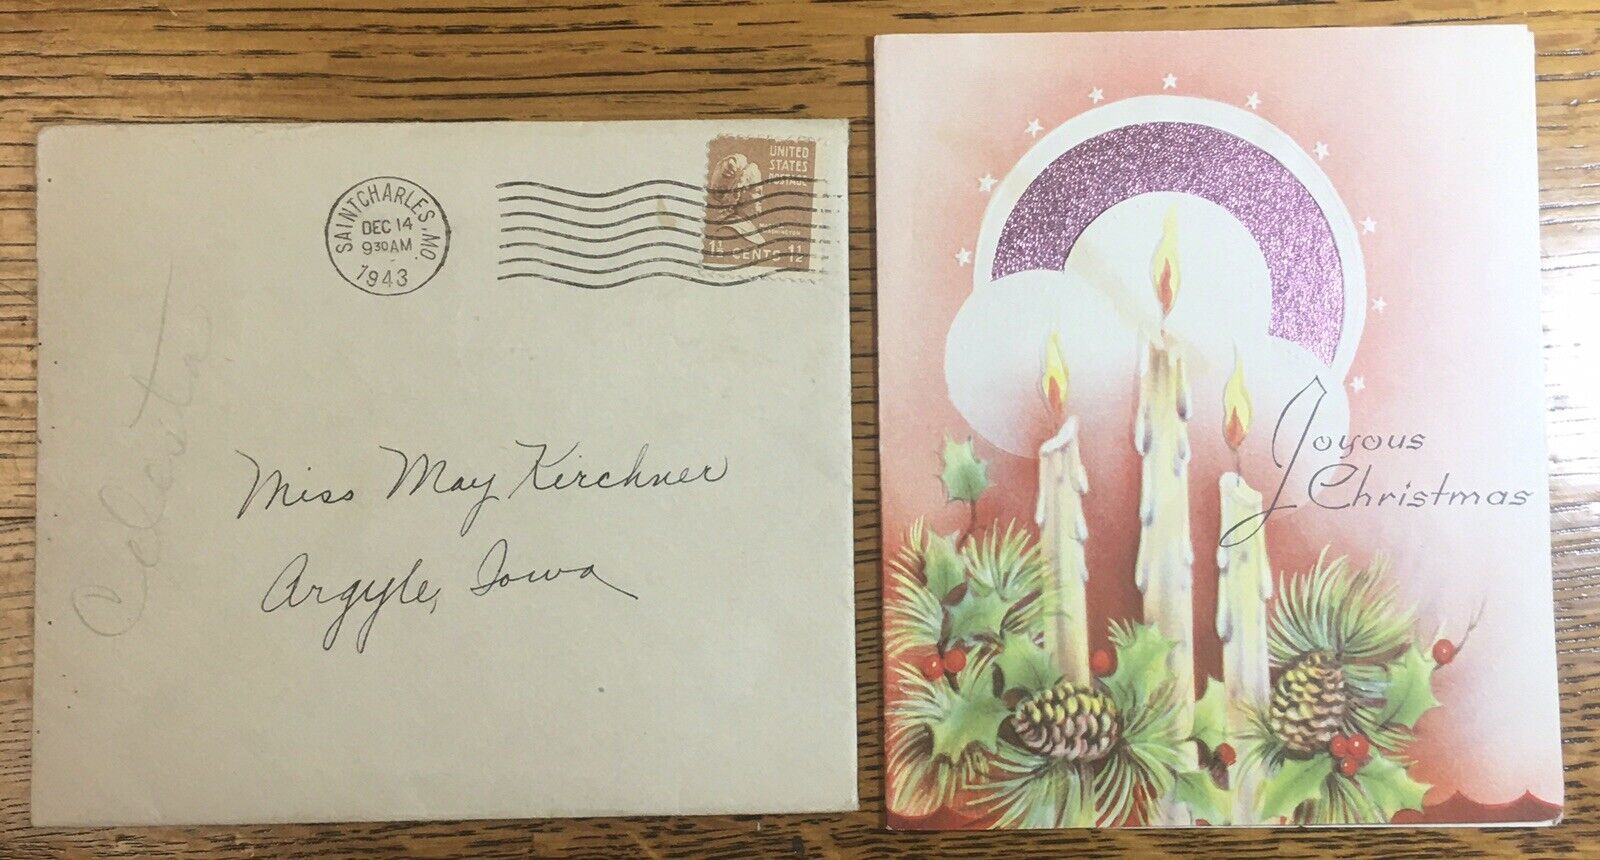 Vintage Joyous Christmas Card and Envelope, Posted St. Charles, MO 1943